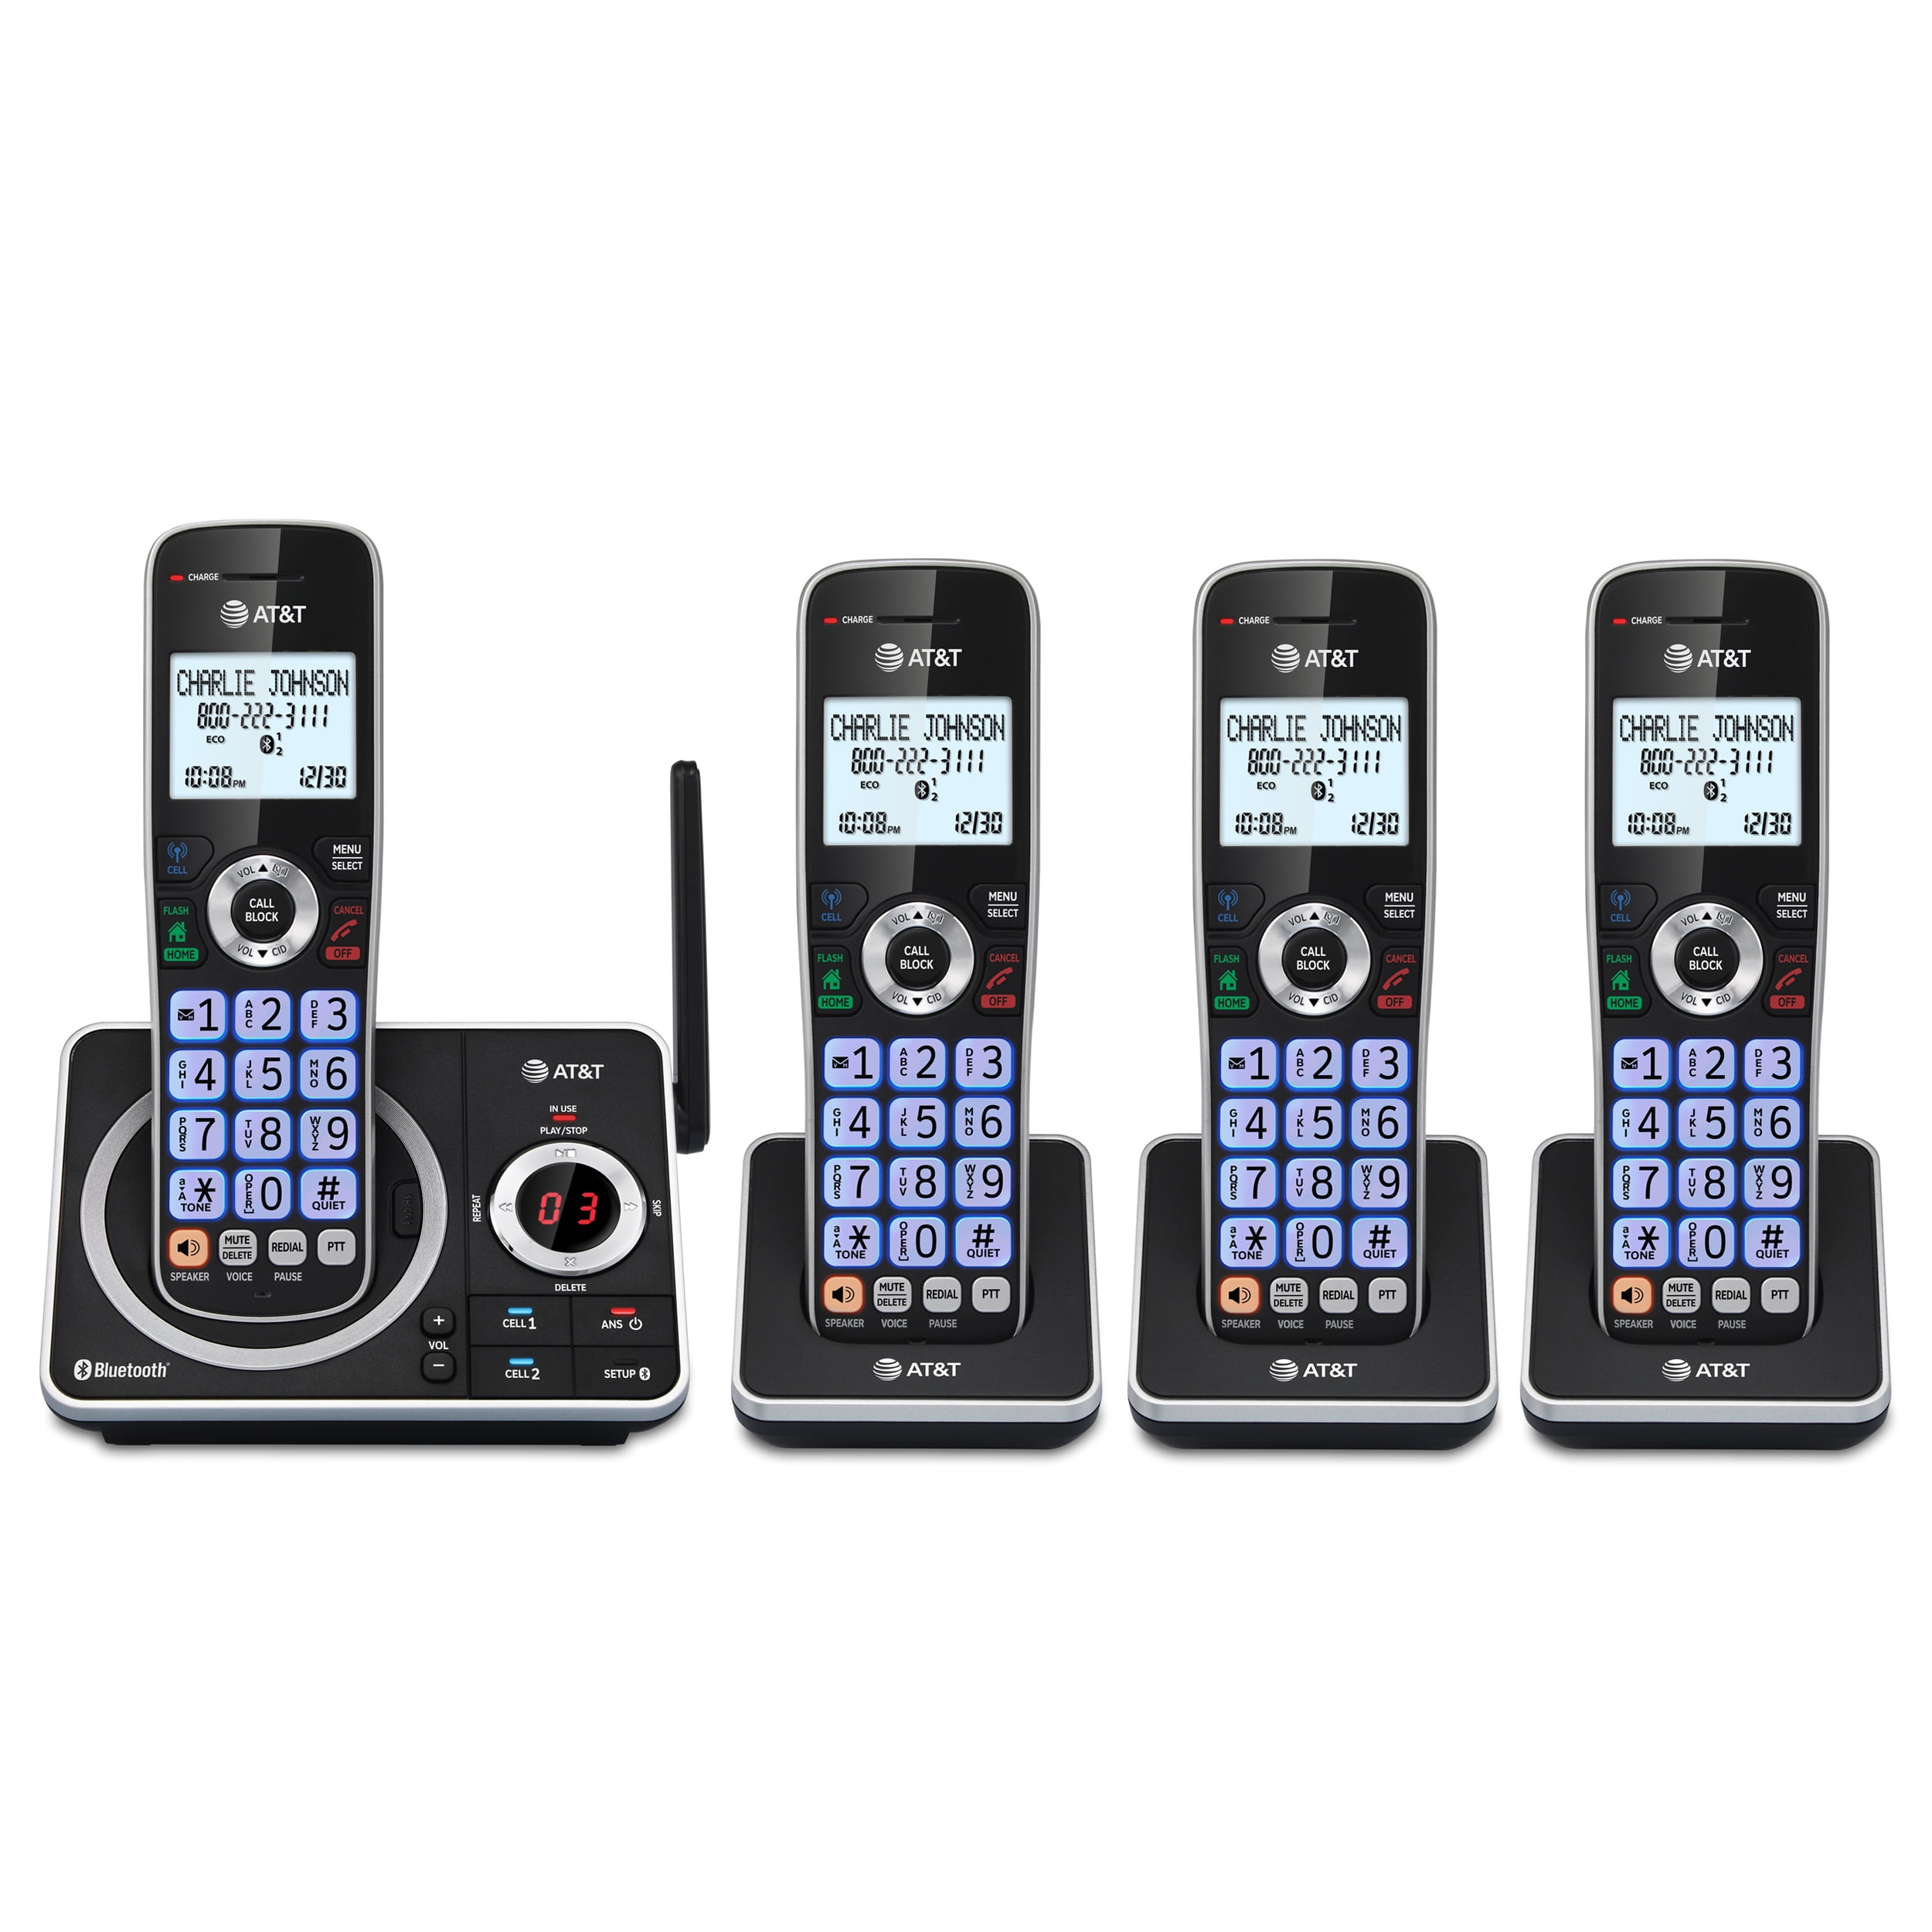 AT&T DLP72412 4 Handset Answering System with Connect to Cell